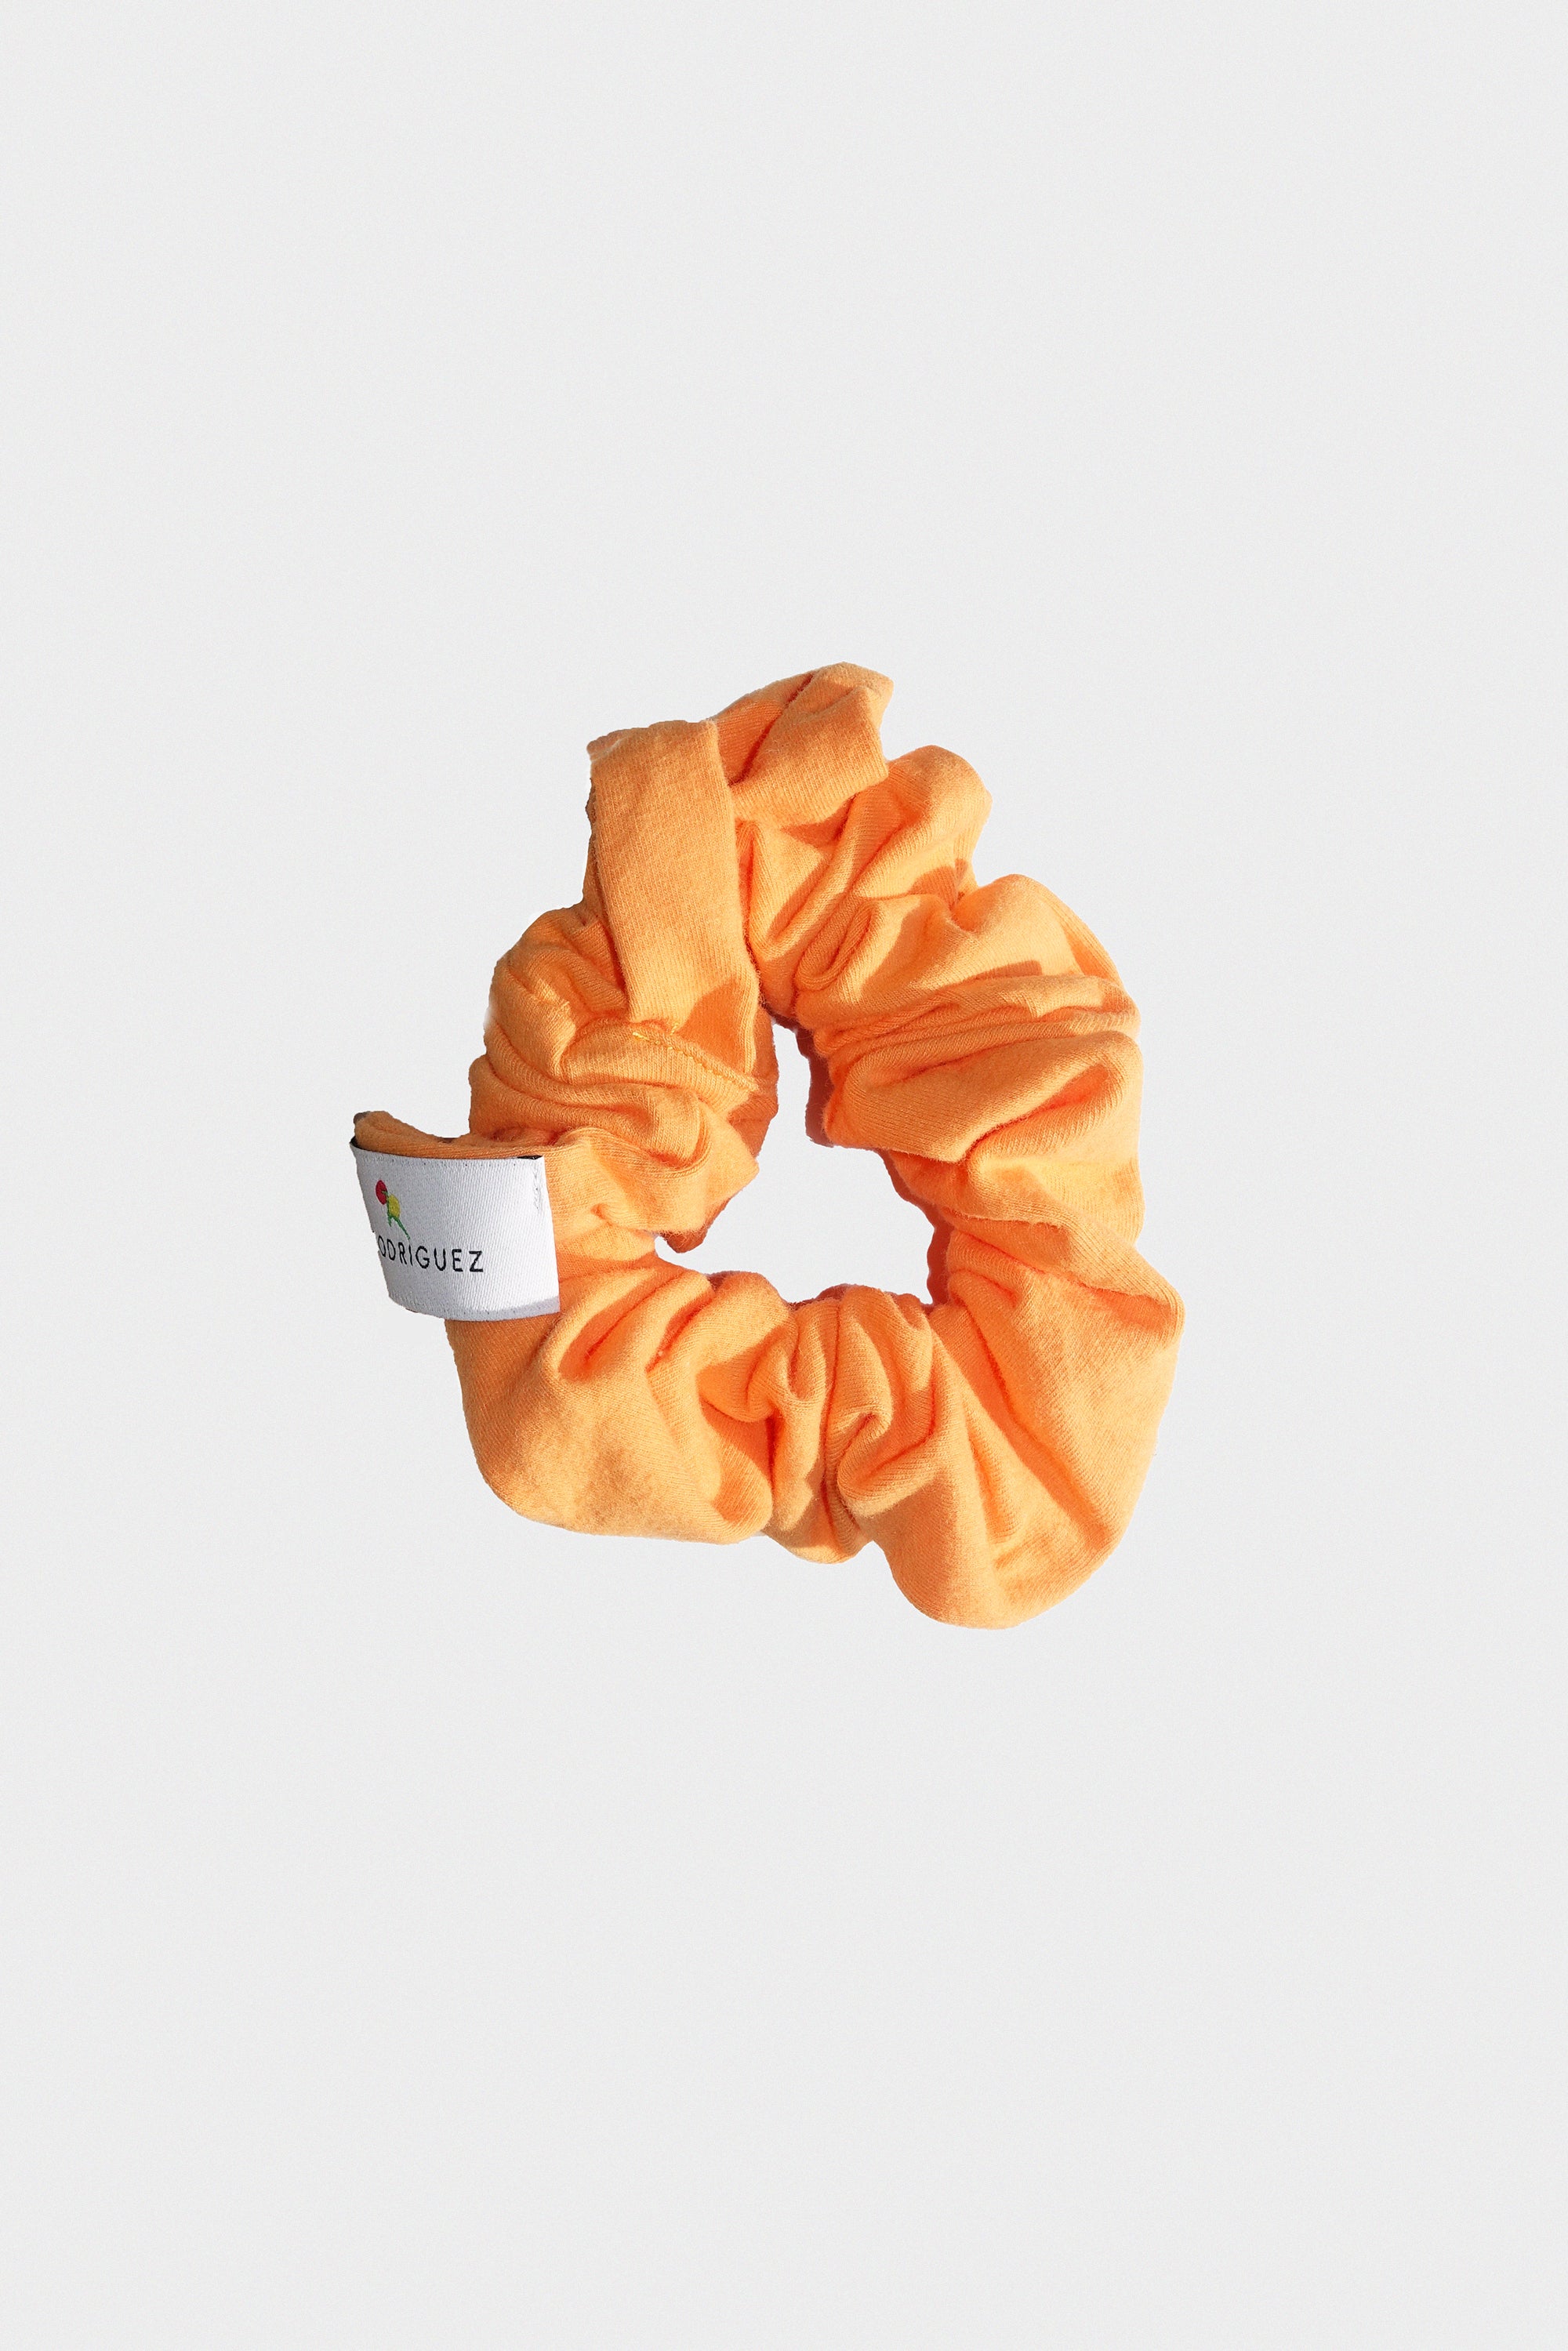 Classic Scrunchie in Creamsicle by Gil Rodriguez